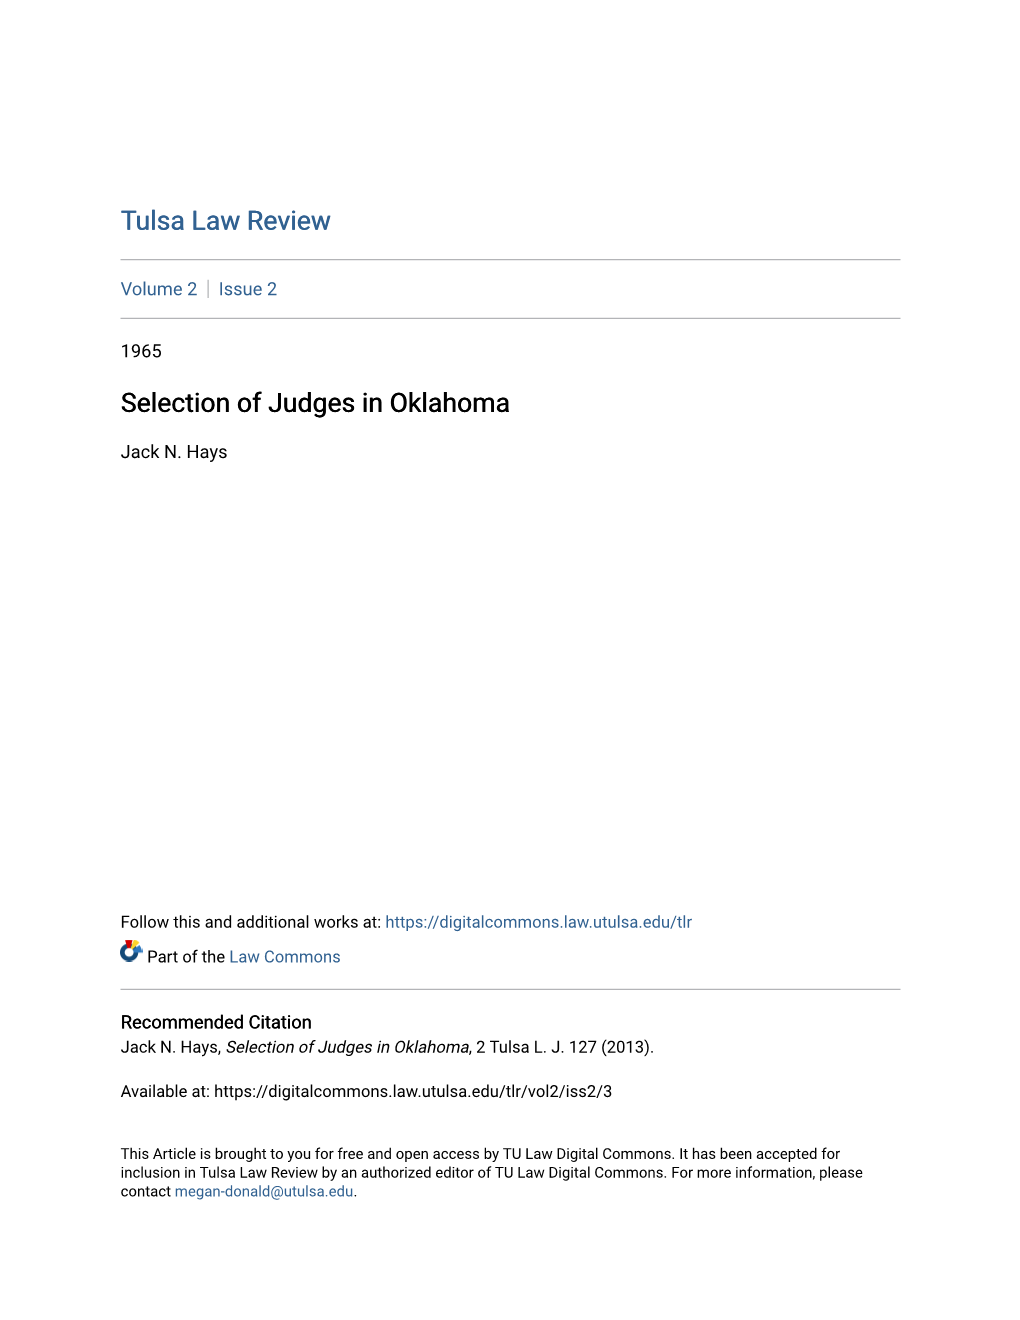 Selection of Judges in Oklahoma